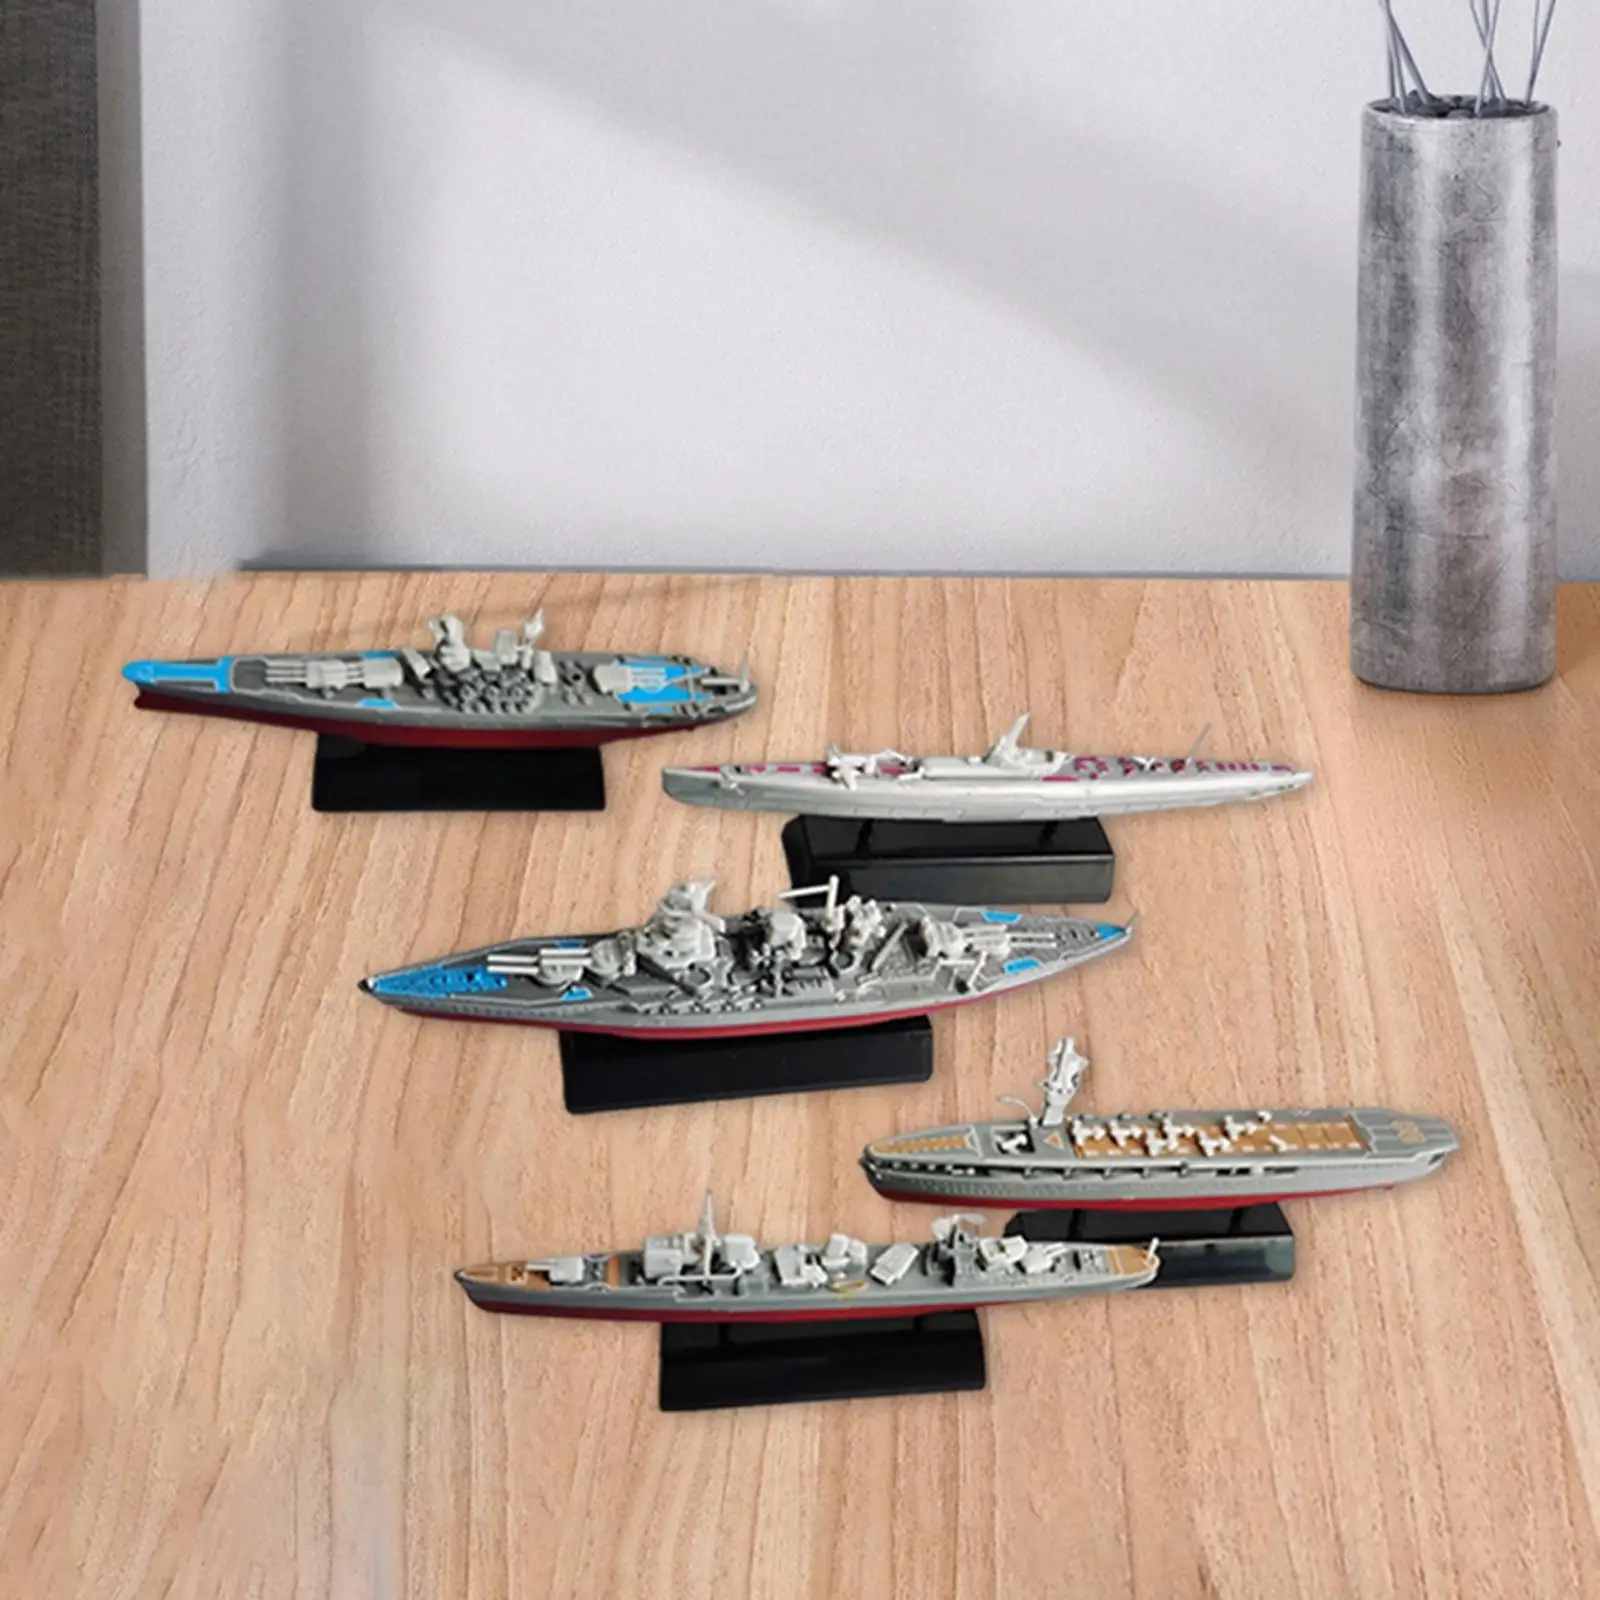 5x Mini Warship Watercraft Model Souvenir Ornaments Gifts Military Display Durable Ship Boat for Book Shelf Teenagers Adult Kids